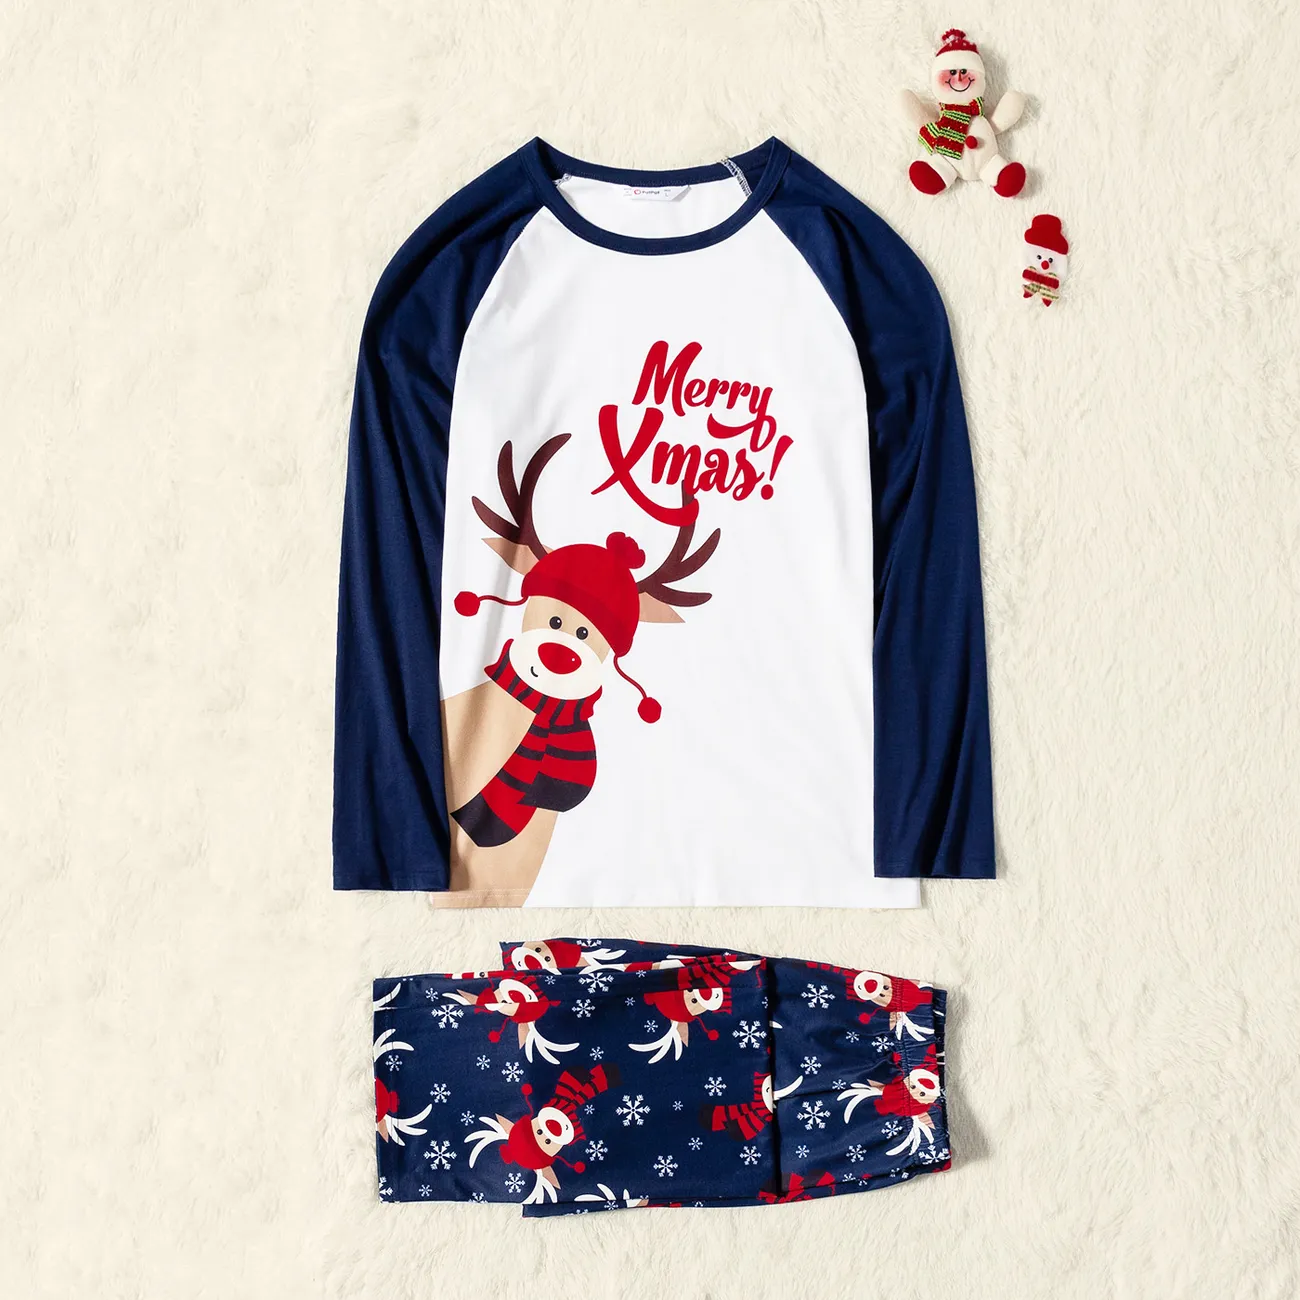 Merry Xmas Letters and Reindeer Print Navy Family Matching Long-sleeve Pajamas Sets (Flame Resistant) Dark blue/White/Red big image 1